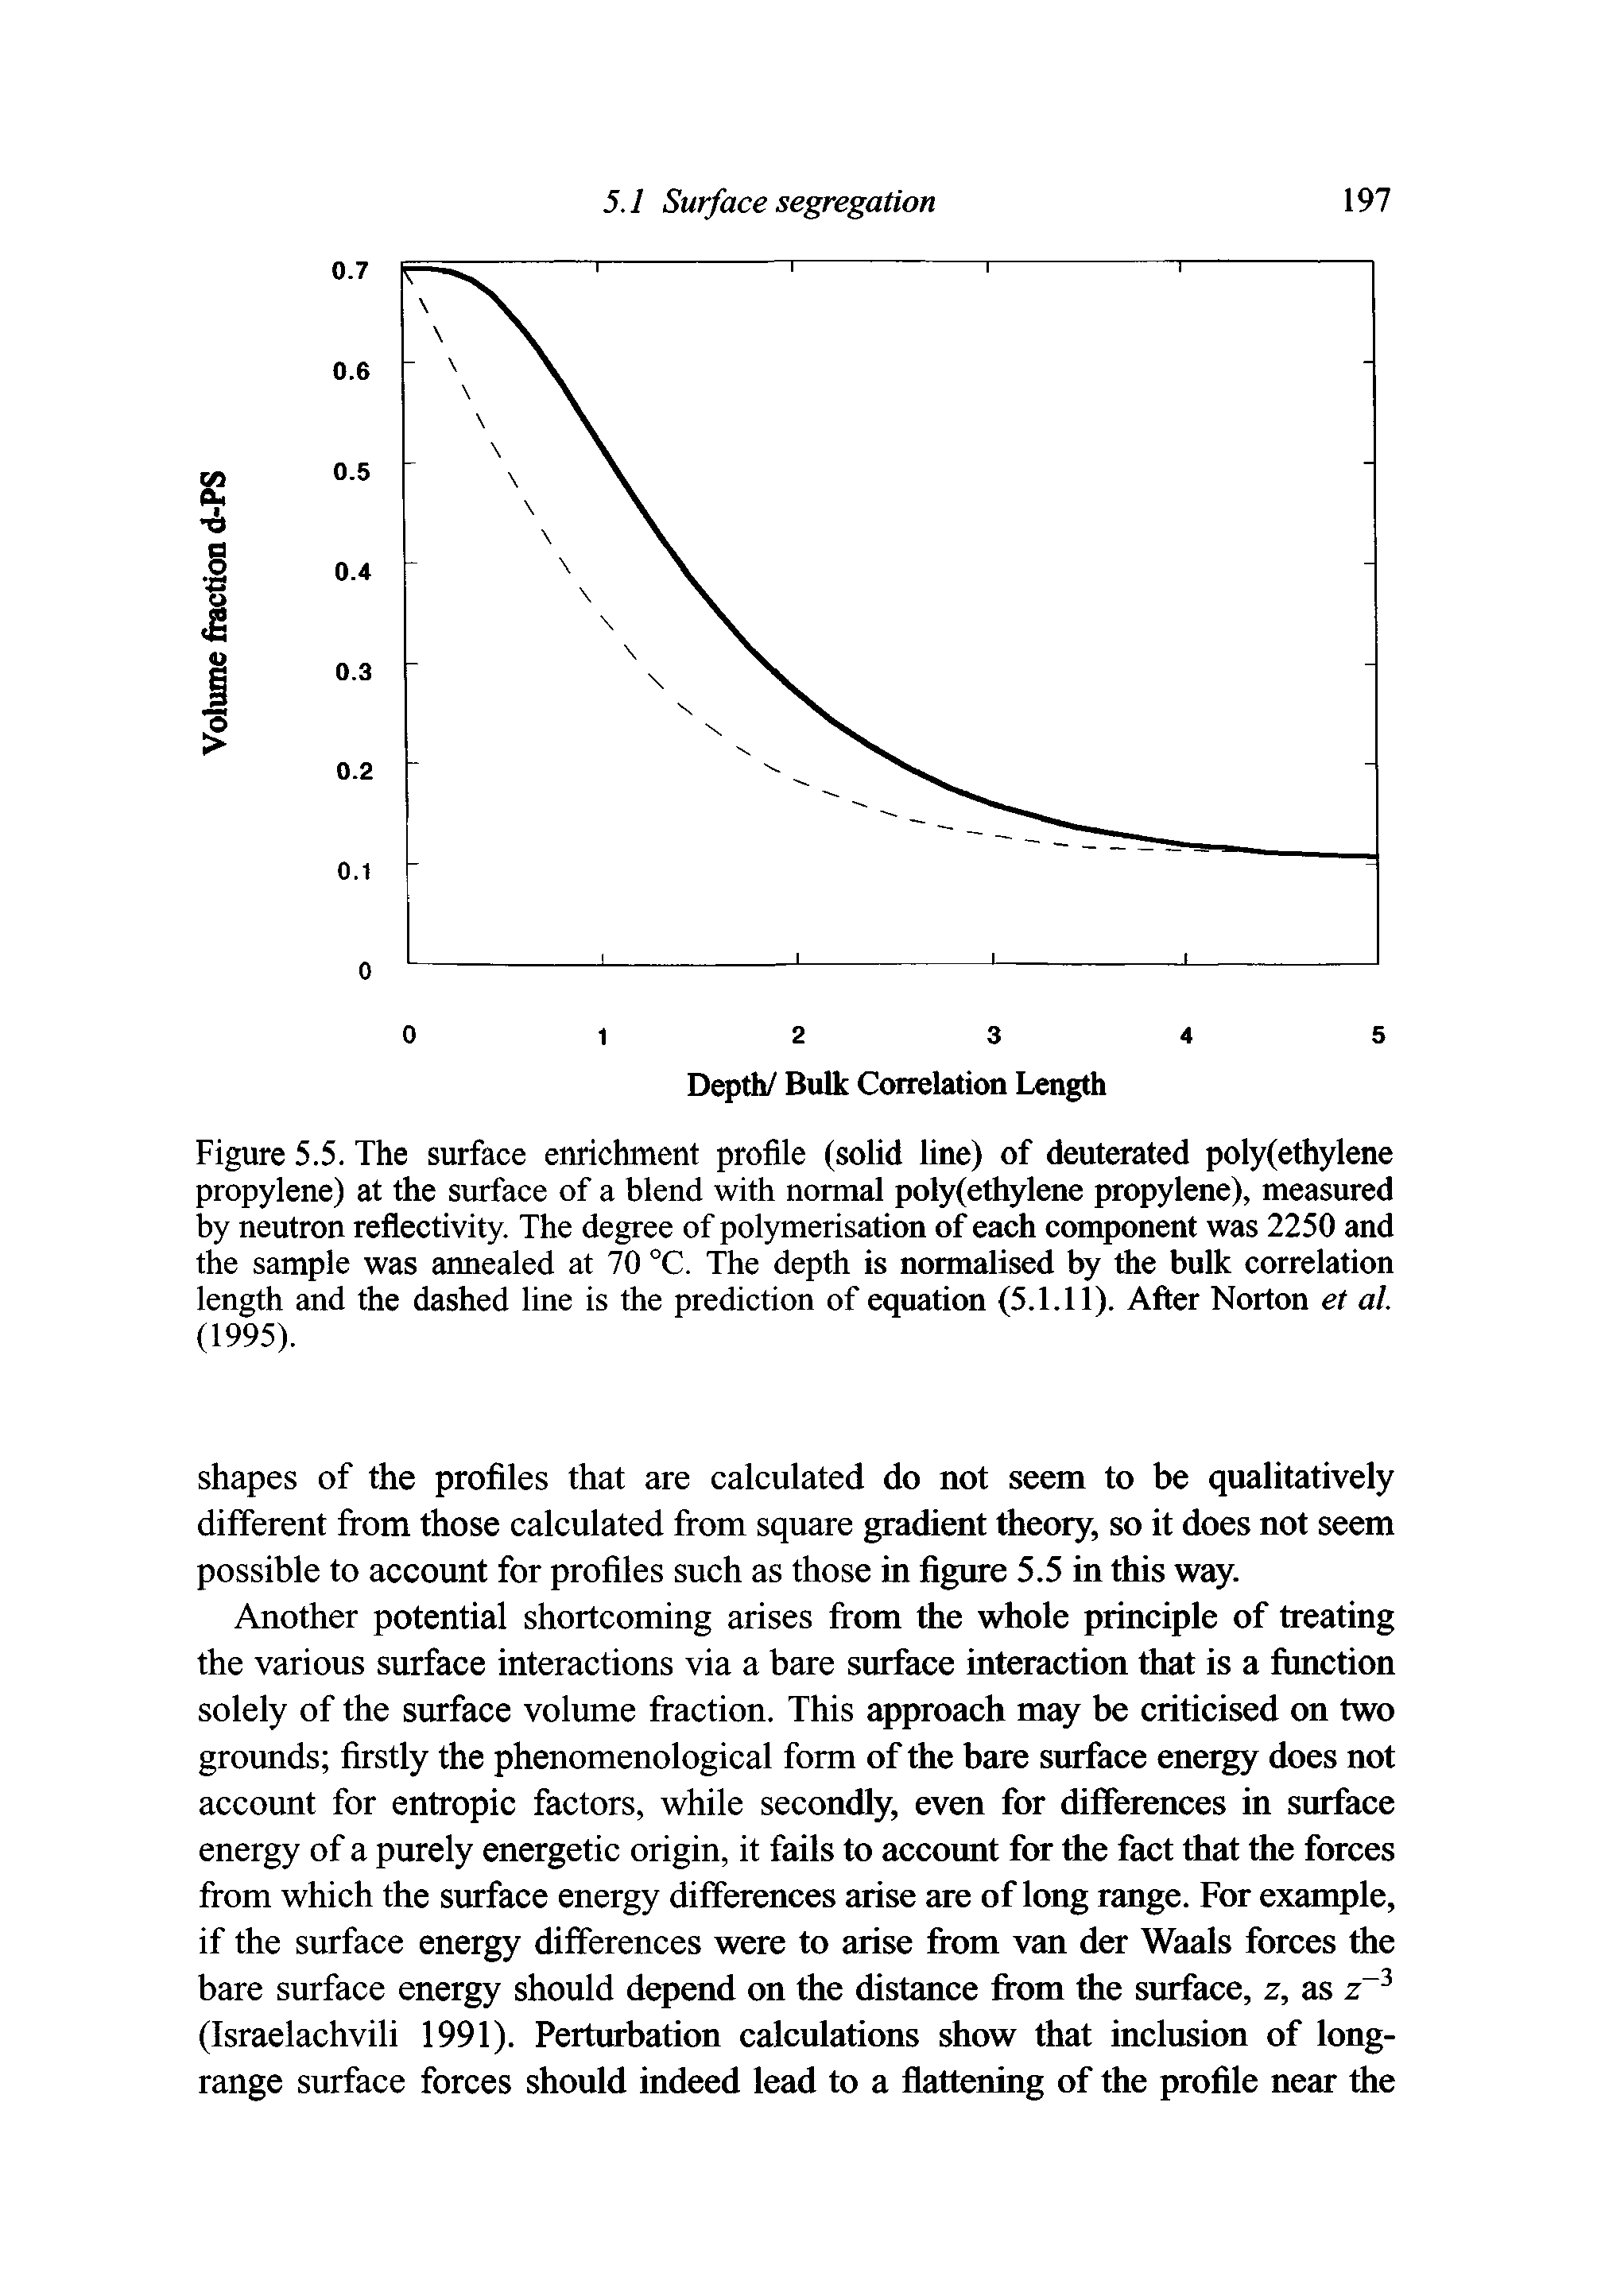 Figure 5.5. The surface enrichment profile (solid line) of deuterated poly(ethylene propylene) at the surface of a blend with normal poly(ethylene propylene), measured by neutron reflectivity. The degree of polymerisation of each component was 2250 and the sample was annealed at 70 °C. The depth is normalised by the bulk correlation length and the dashed line is the prediction of equation (5.1.11). After Norton et al. (1995).